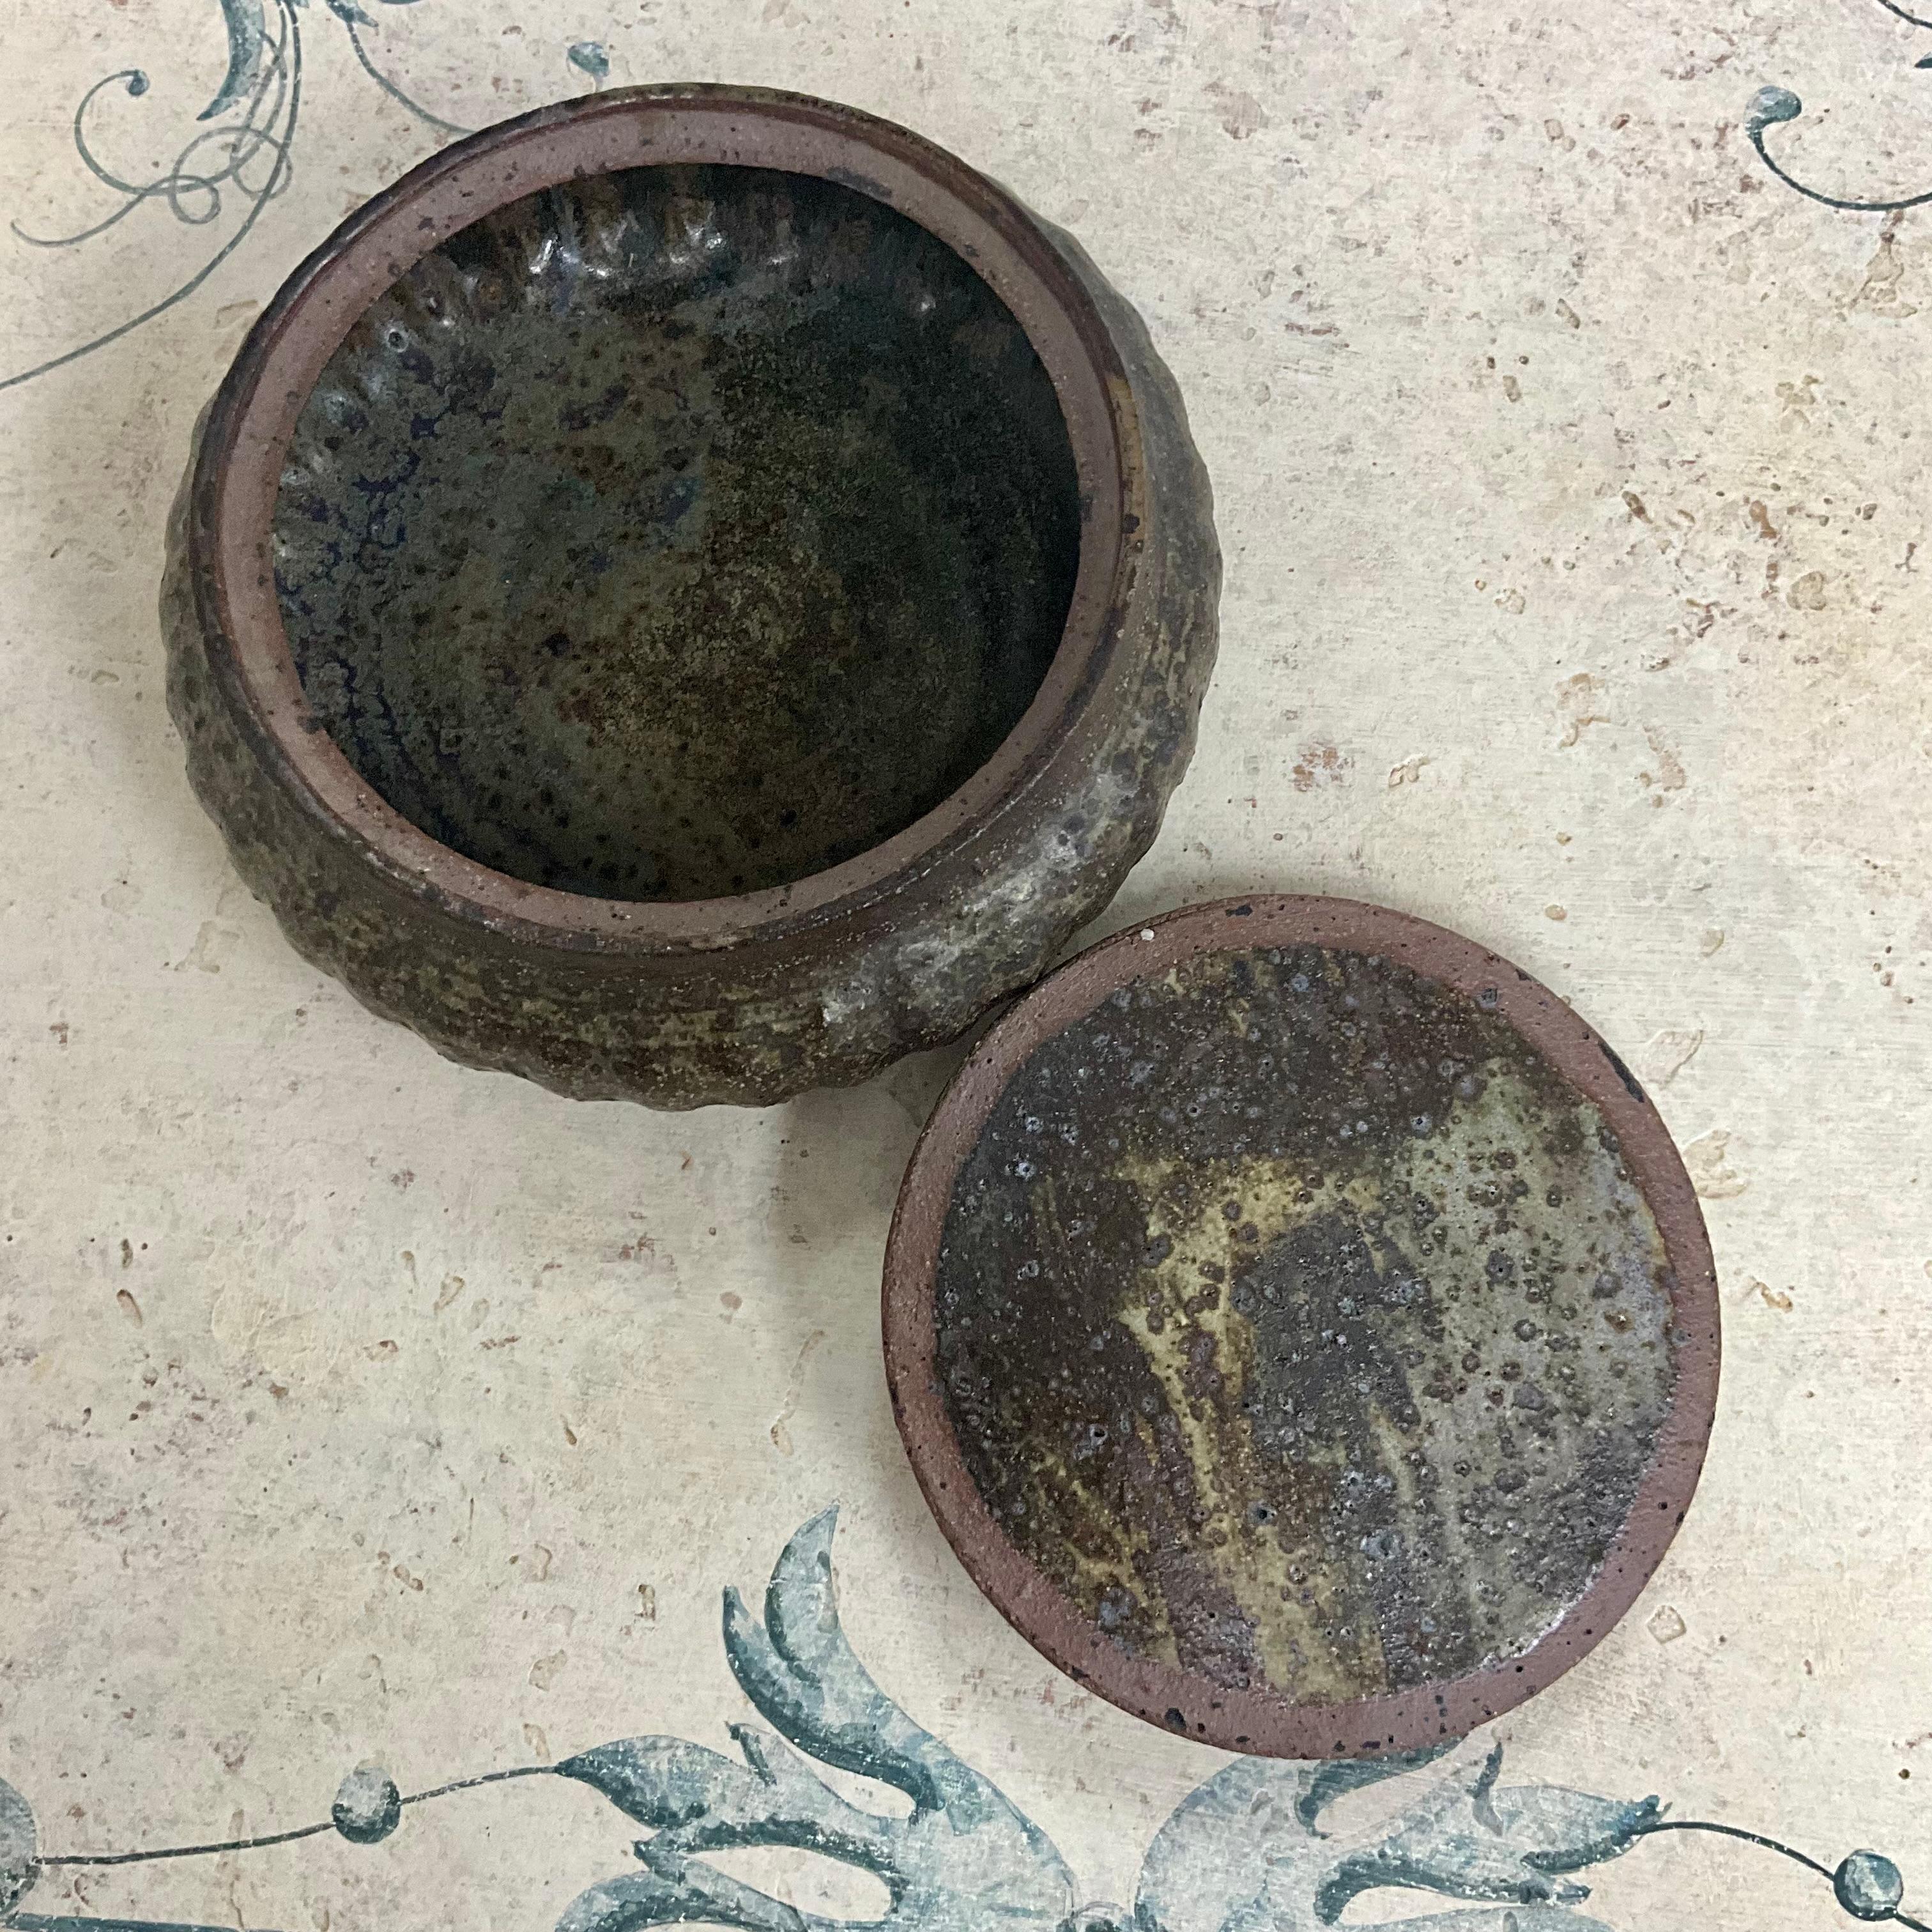 Exceptional lidded hand crafted studio pottery vessel box from the mid 20th century, with organic colors of brown, green and even a light colored plum.  I’m unsure if this piece is signed as it still retains the original green protective felt on the